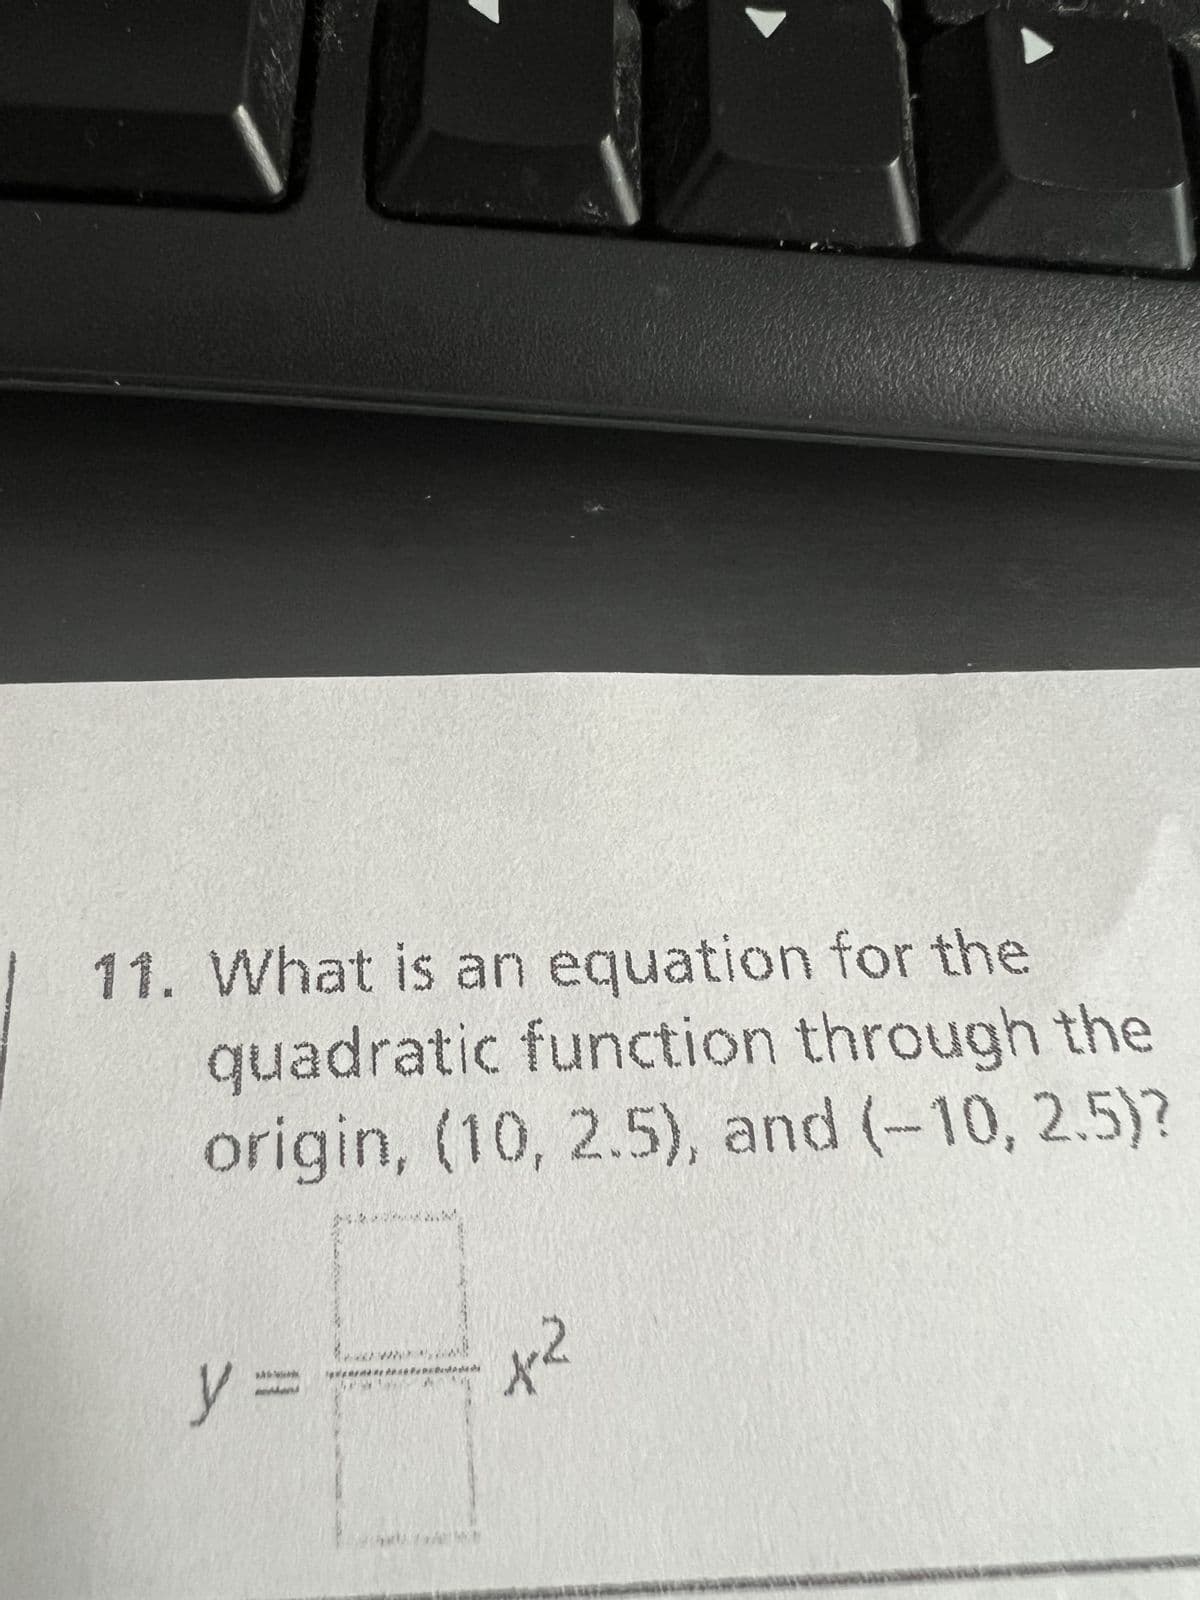 11. What is an equation for the
quadratic function through the
origin, (10, 2.5), and (-10, 2.5)?
y
hand
Papa
42
X